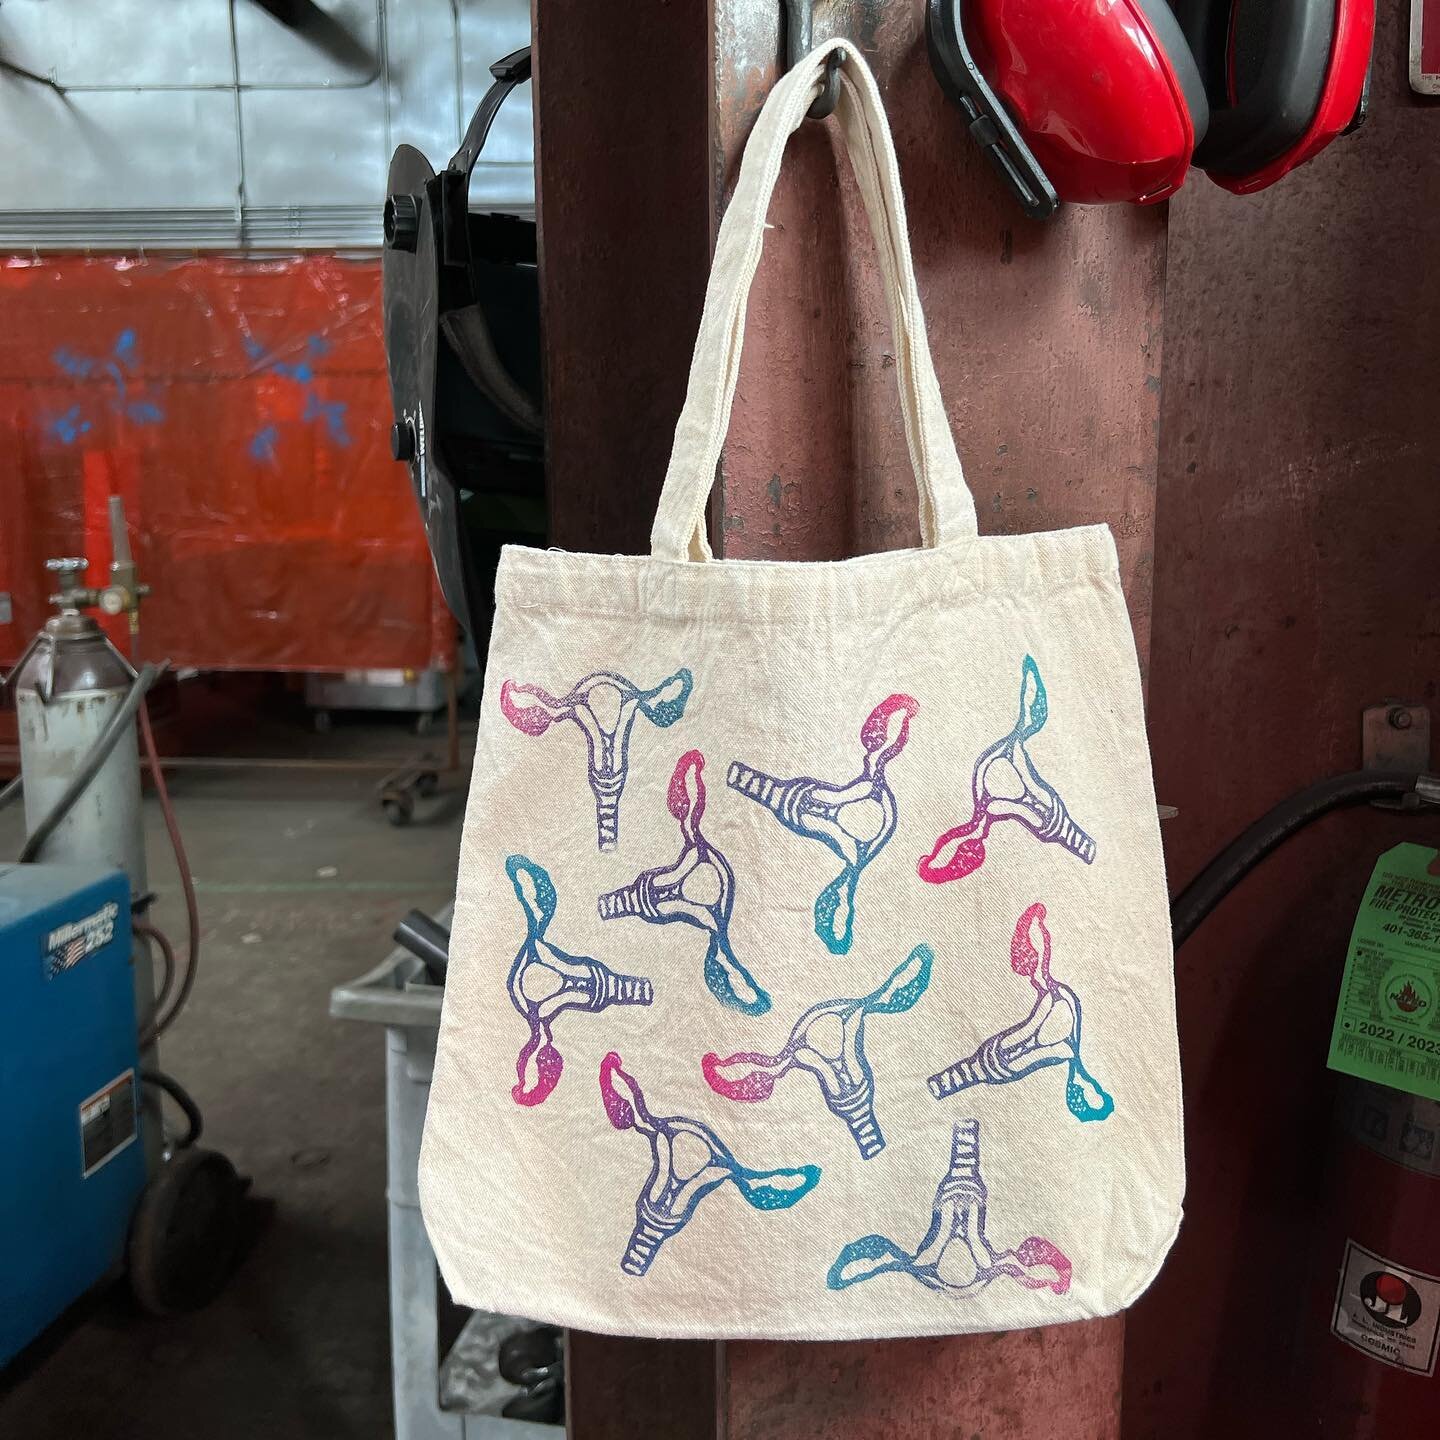 Taking orders for Uterus Totes &mdash; $35/each + 50% will be donated to the National Network for Abortion Funds @abortionfunds 

I&rsquo;ll be making these to order so you can choose your color &mdash; DM if you want to support the cause 🌷

P.S. th